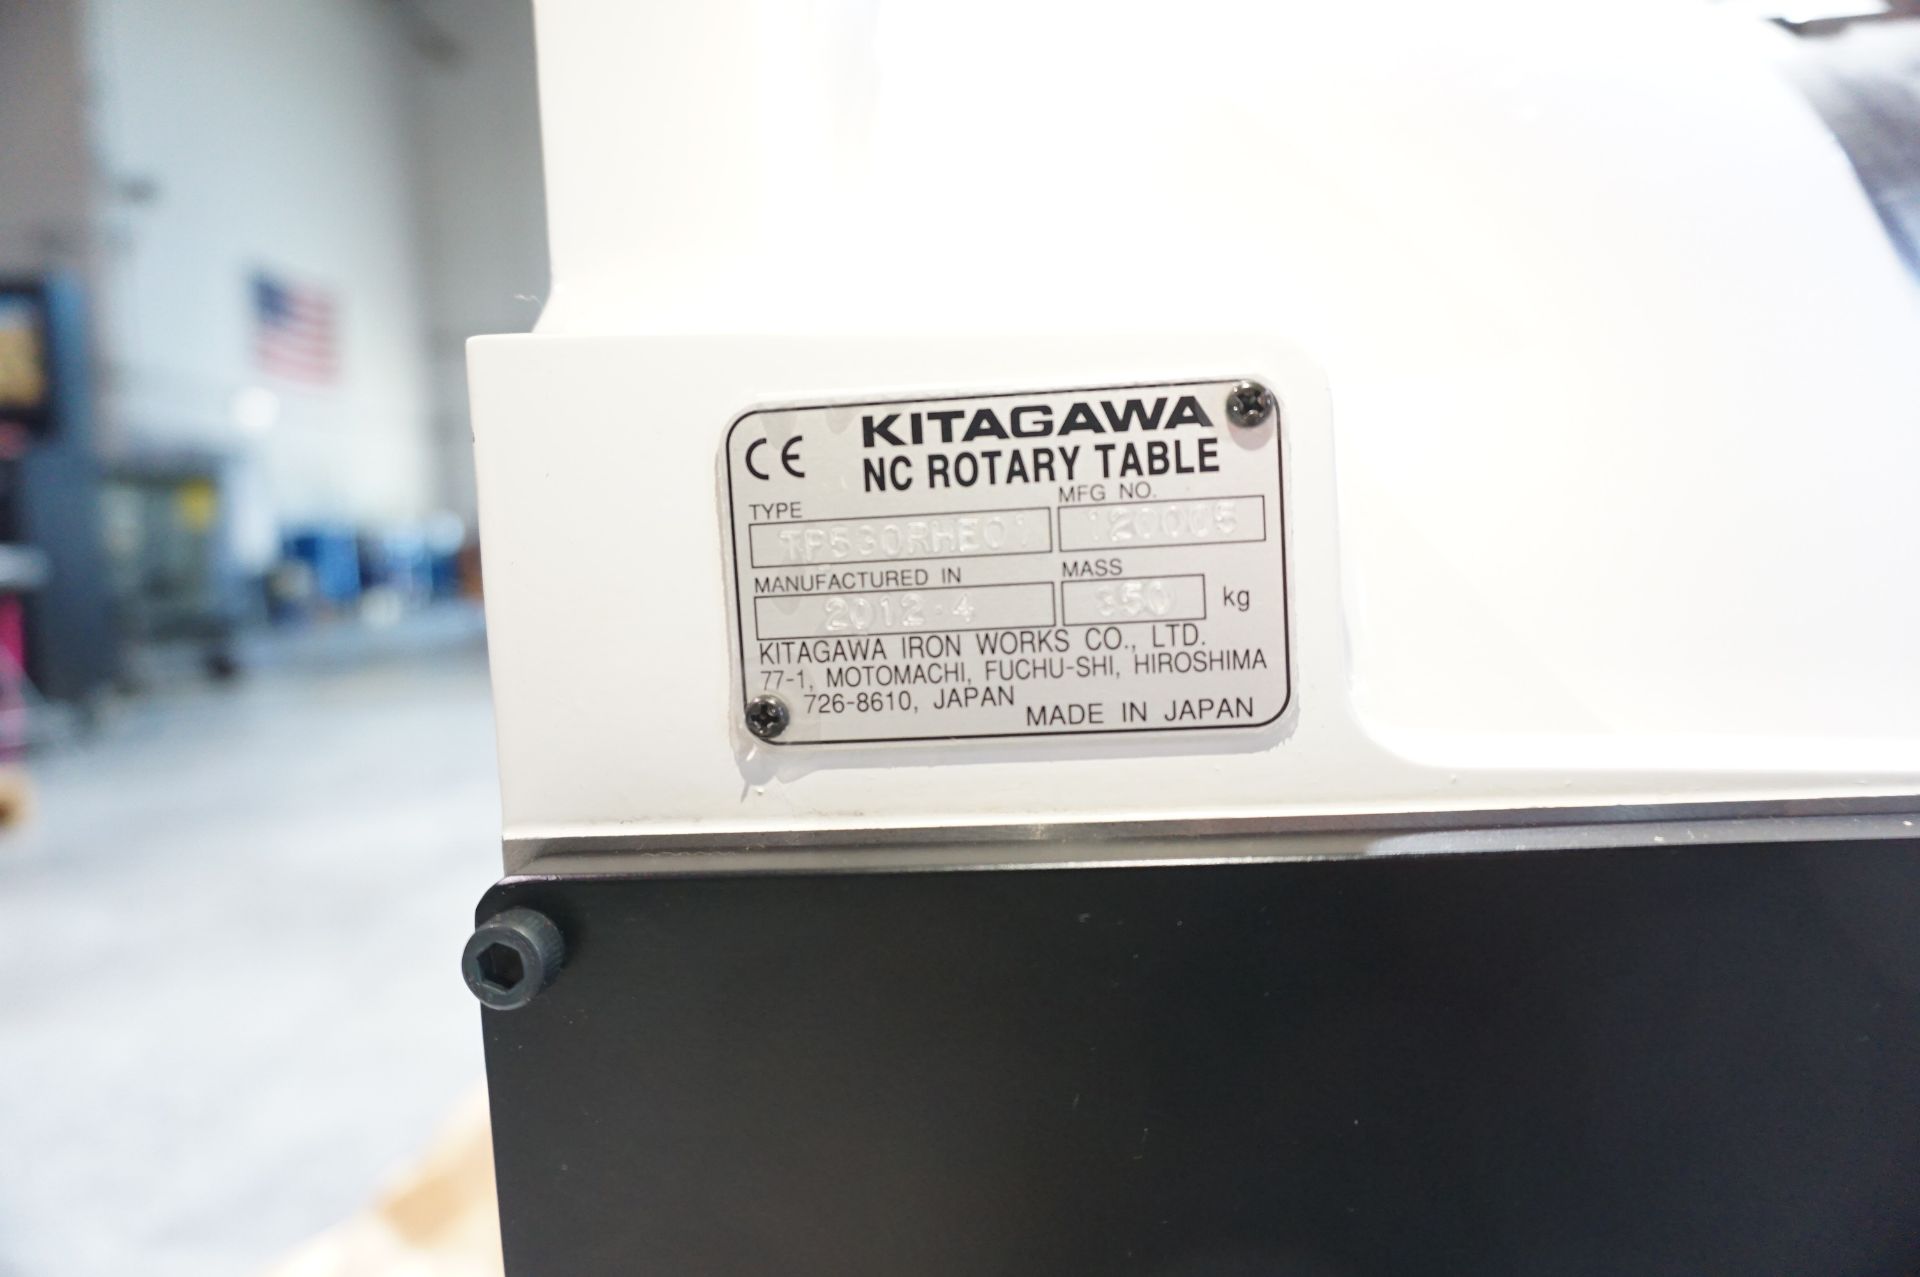 NEVER USED IN ORIGINAL BOX - 2012 KITIGAWA TP530RHE01 4TH AXIS BIG BORE ROTARY TABLE, WEIGHT 350 KG - Image 5 of 5